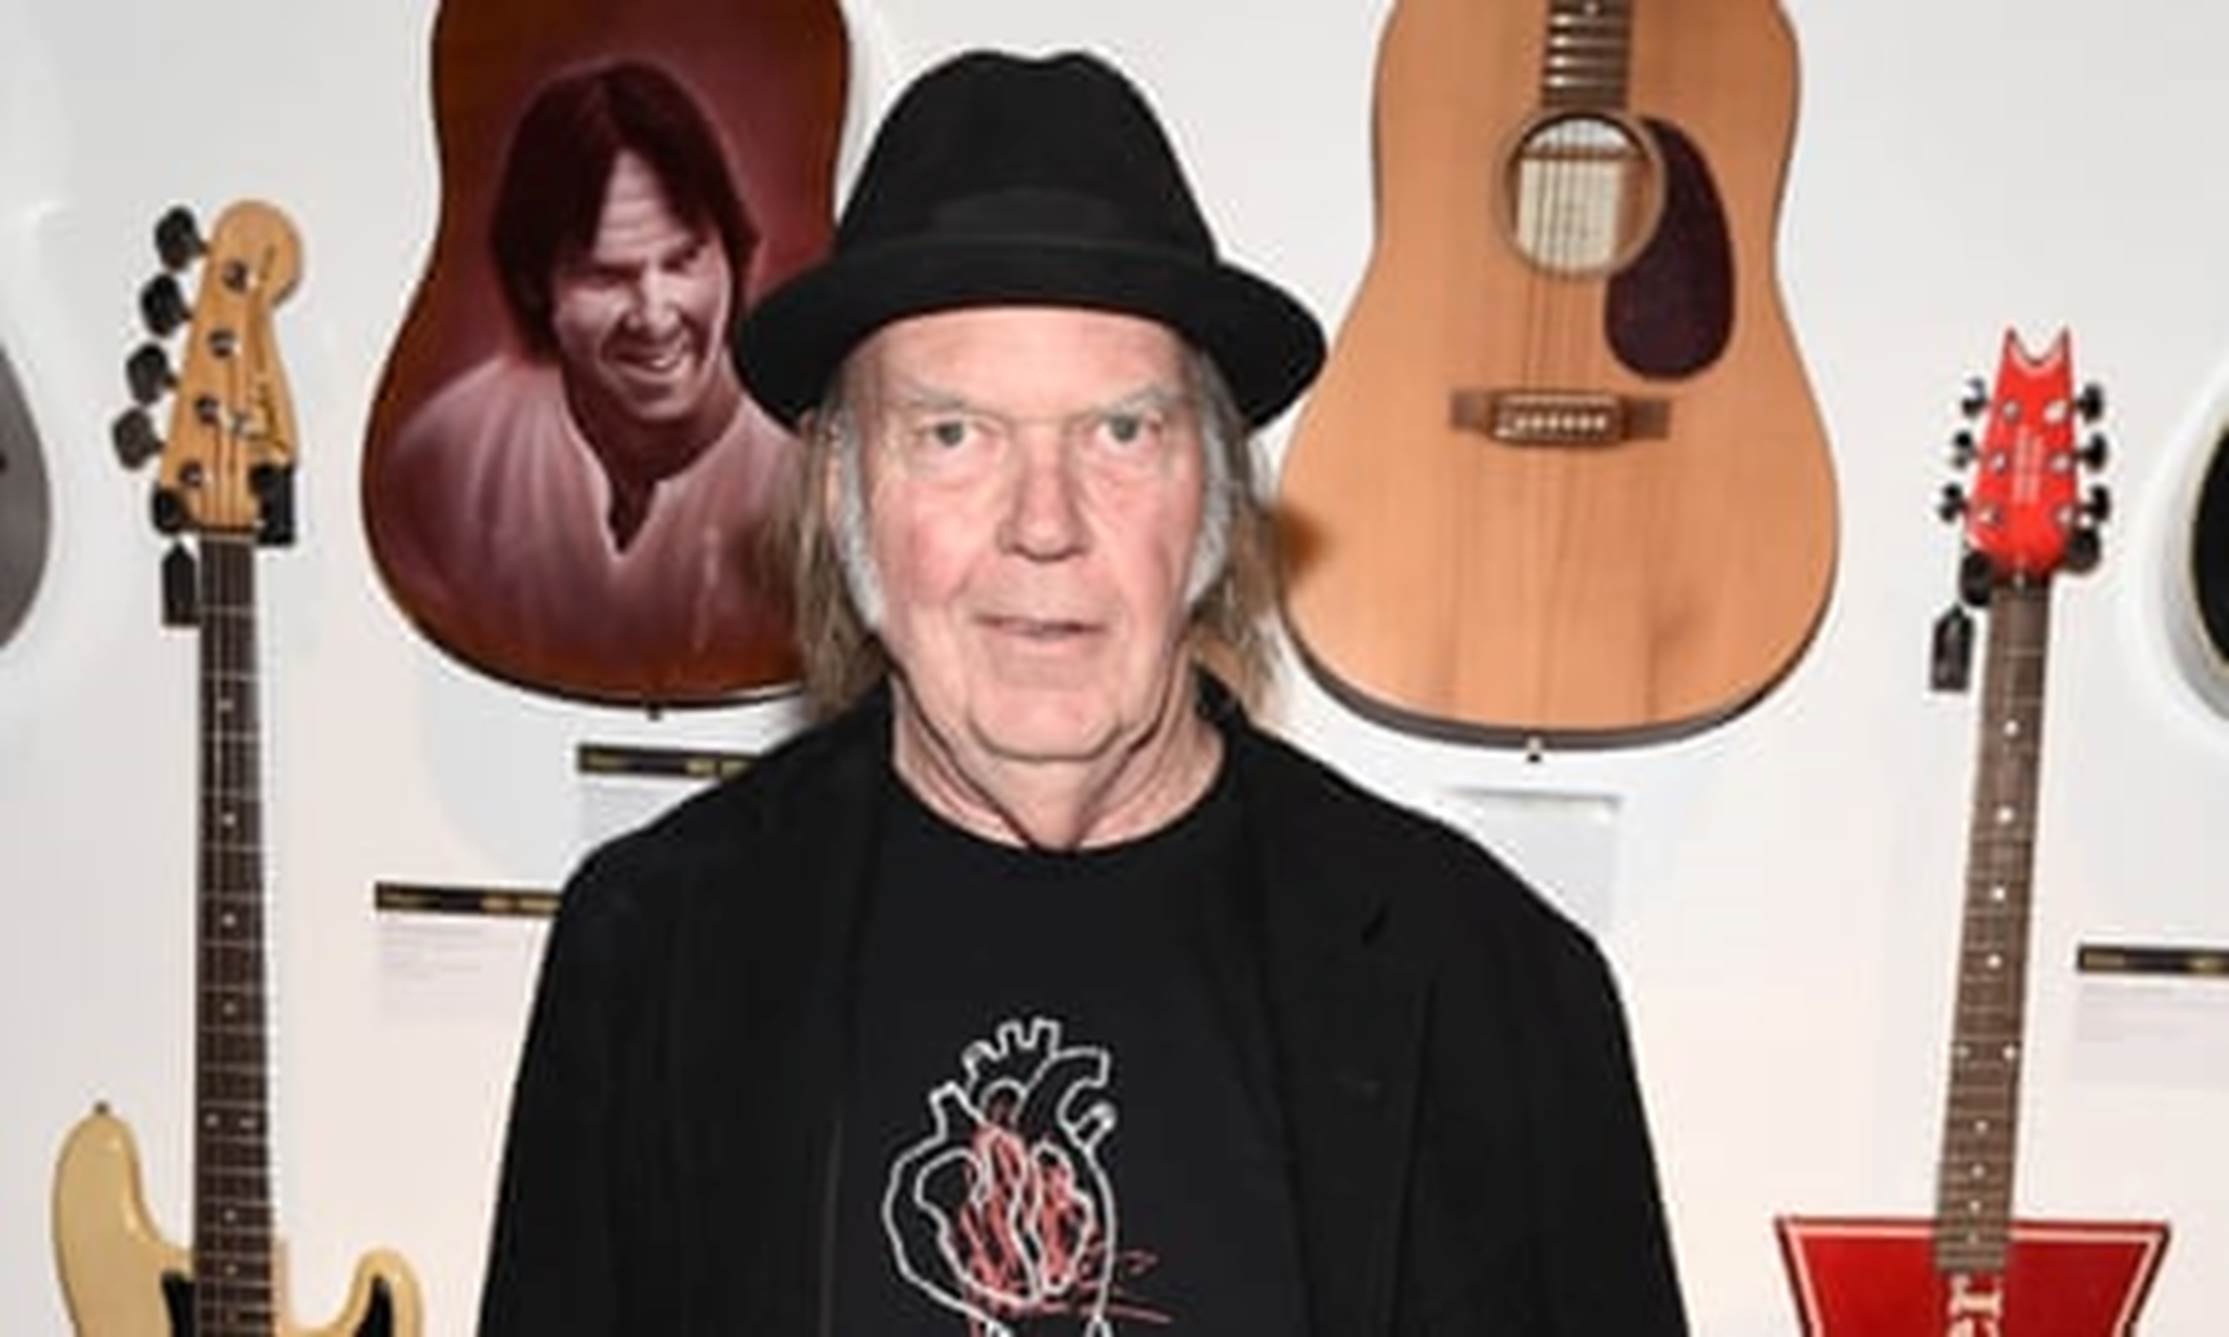 Monsanto 'fusion center' officials wrote lengthy reports about singer Neil Young's anti-Monsanto advocacy.